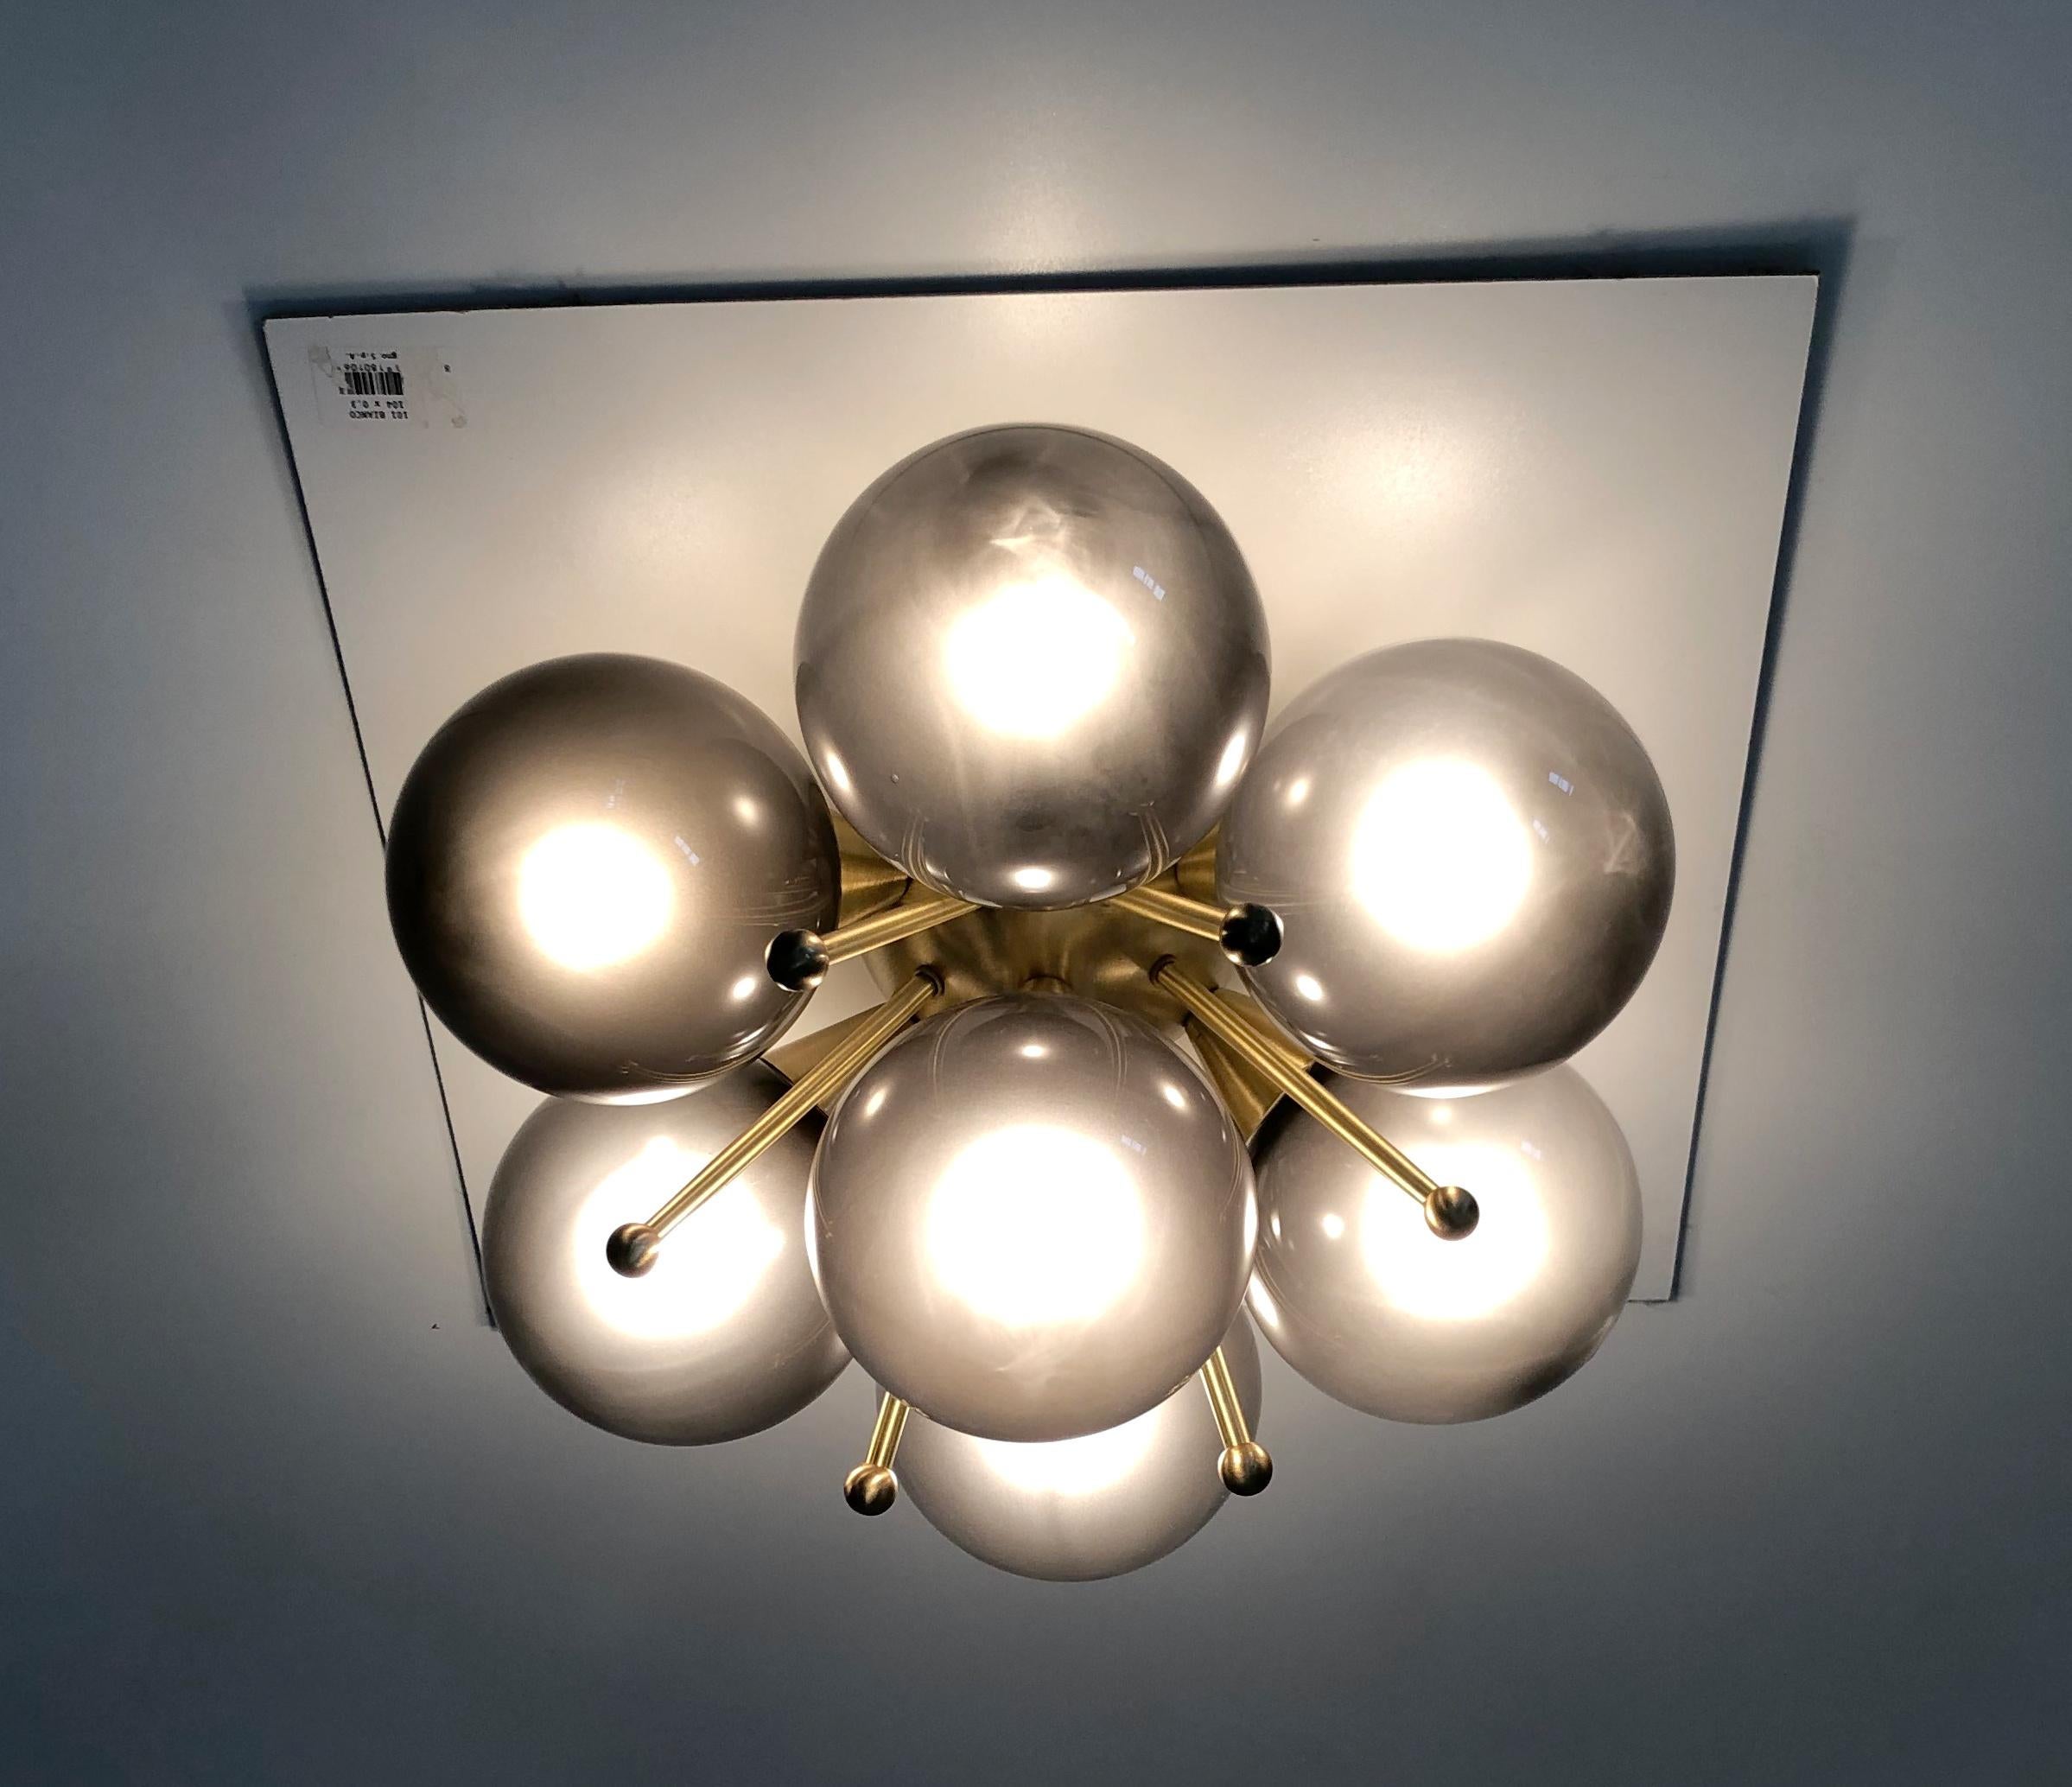 Italian flush mount with Murano glass globes mounted on solid brass frame 
Designed by Fabio Bergomi / Made in Italy 7 lights / E12 or E14 type / max 40W each 
Diameter: 22 inches / Height: 11 inches 
Order only / This item ships from Italy 
Order